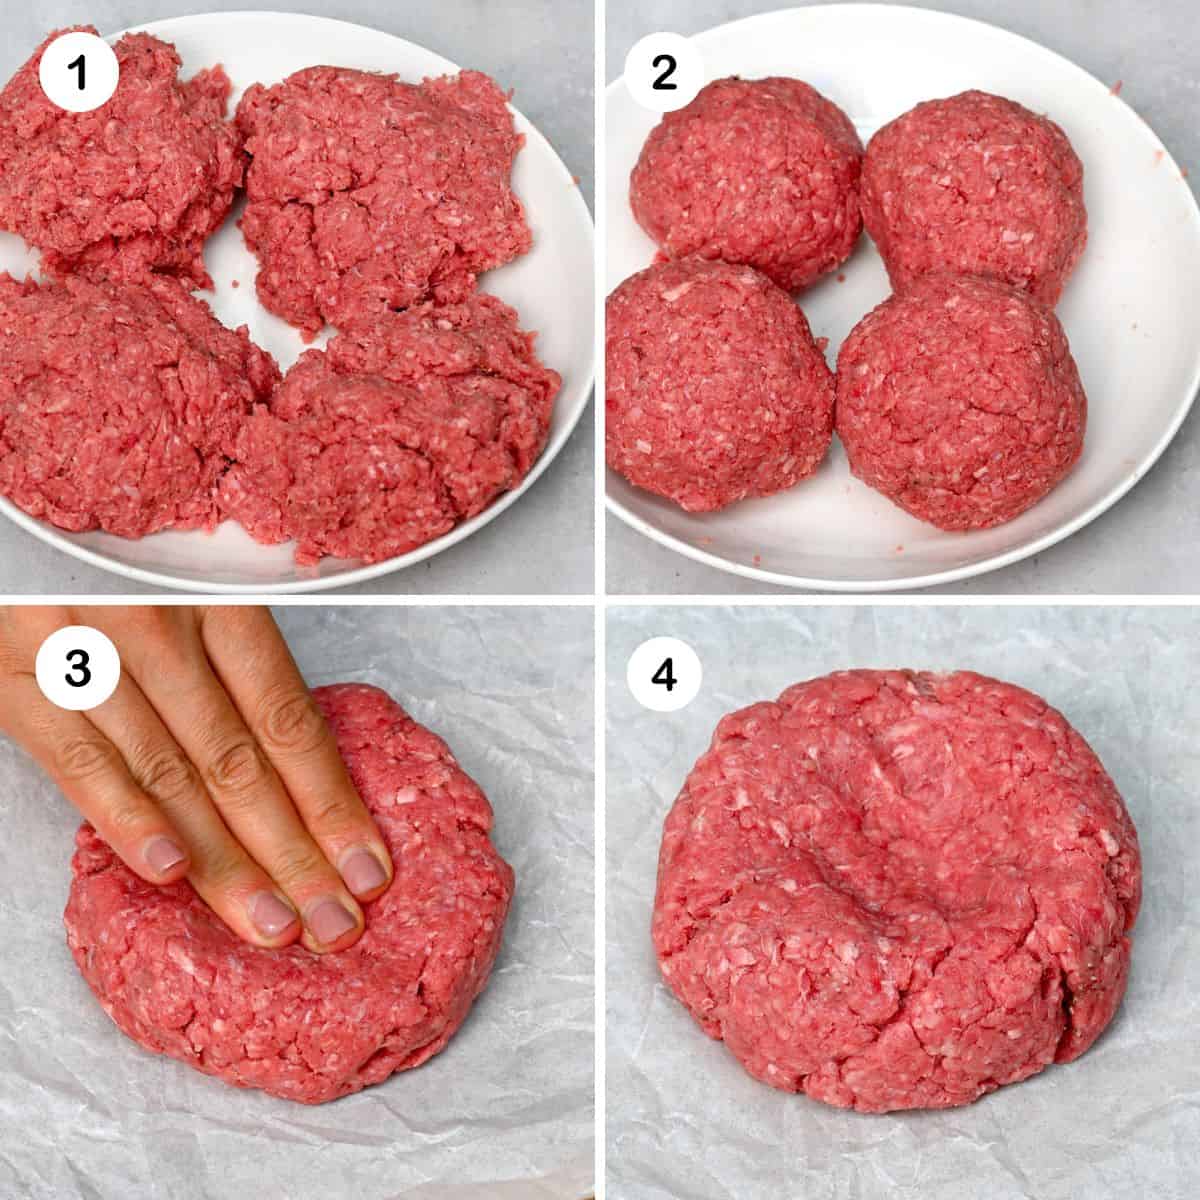 Steps for shaping burger patties